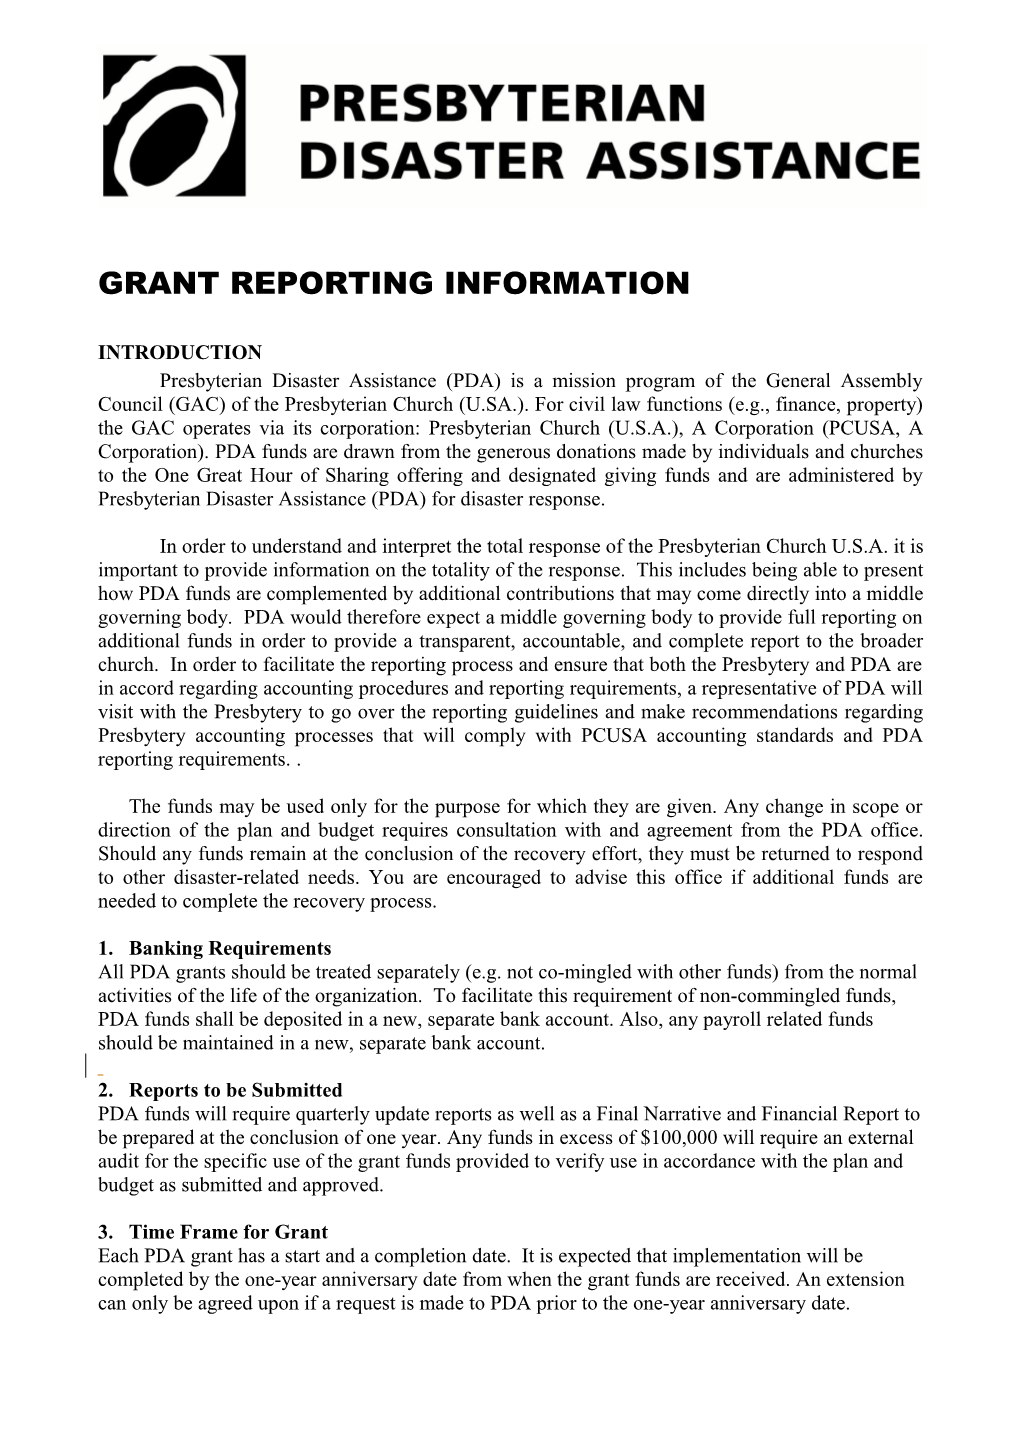 Grant Reporting Information